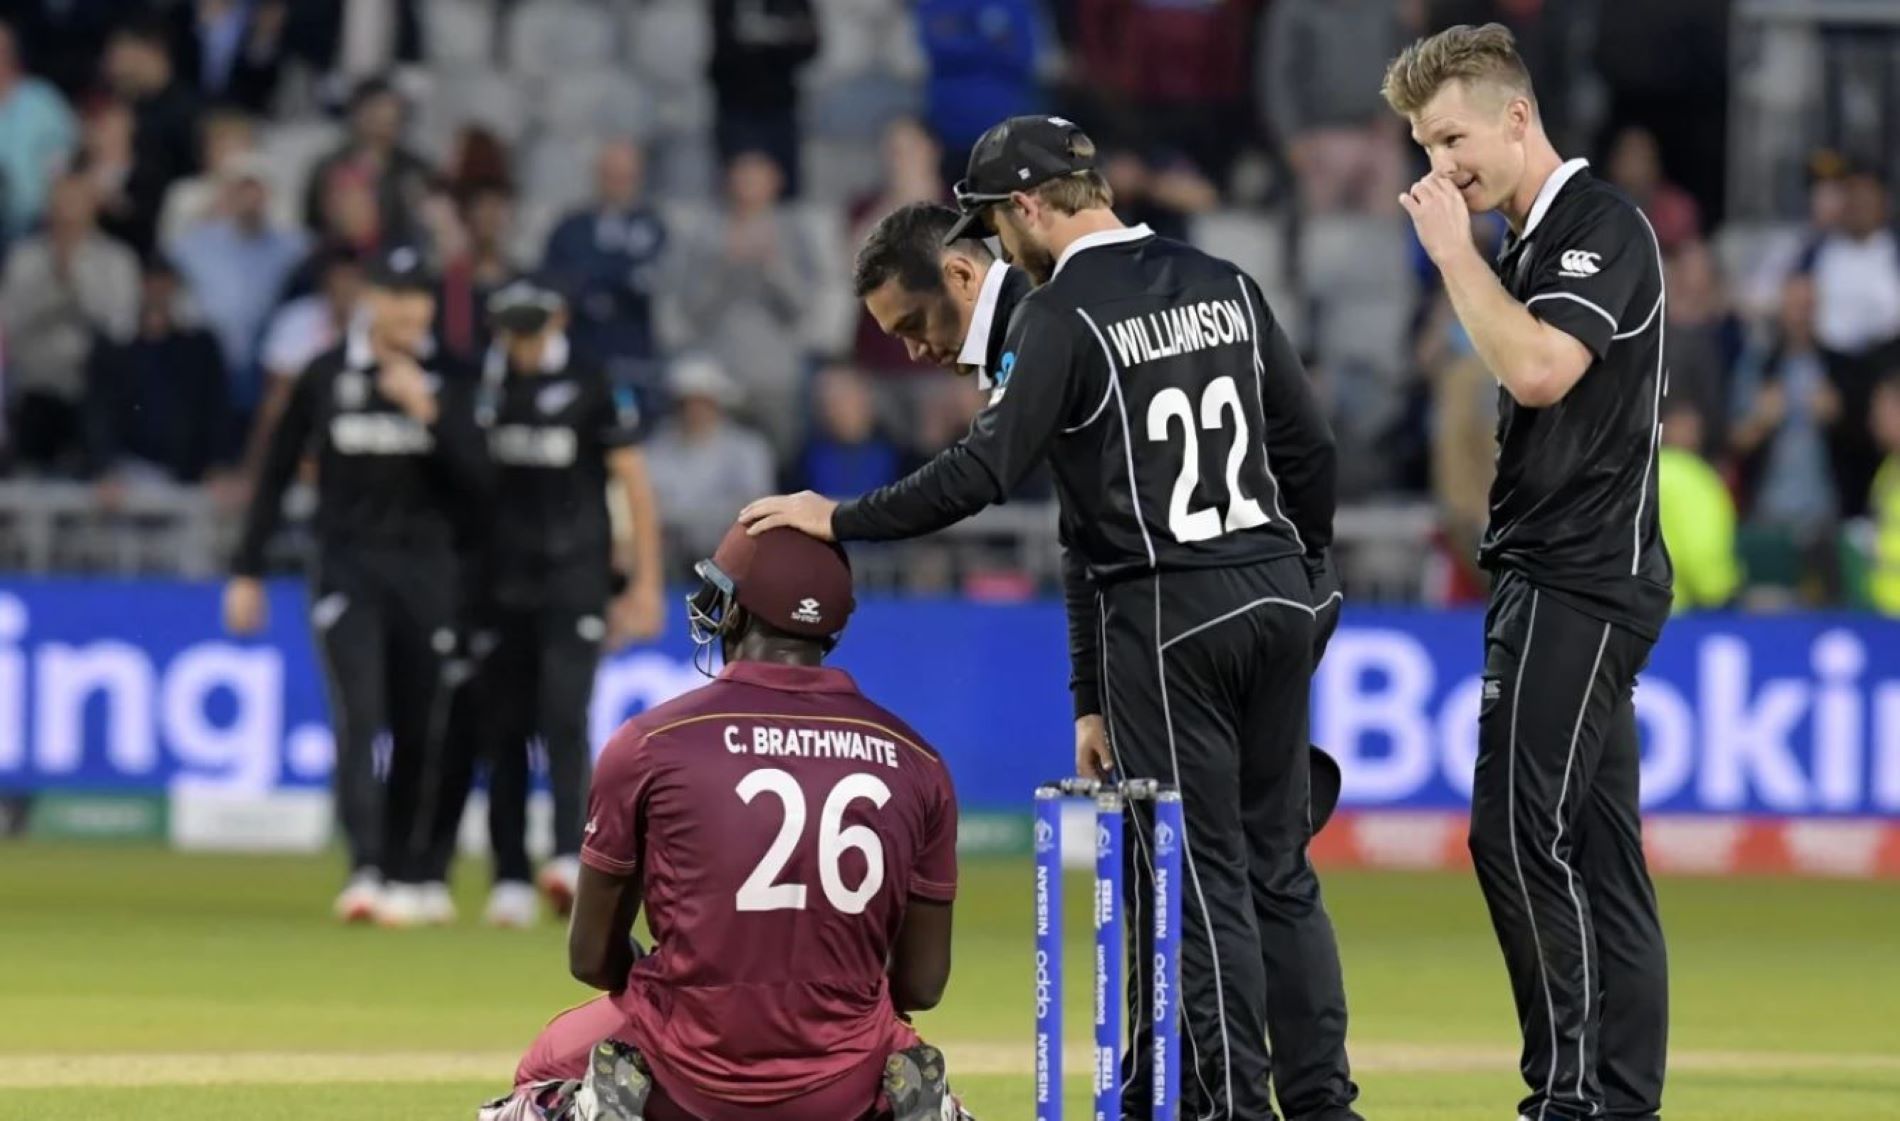 Carlos Brathwaite was disconsolate after nearing pulling off a miracle.